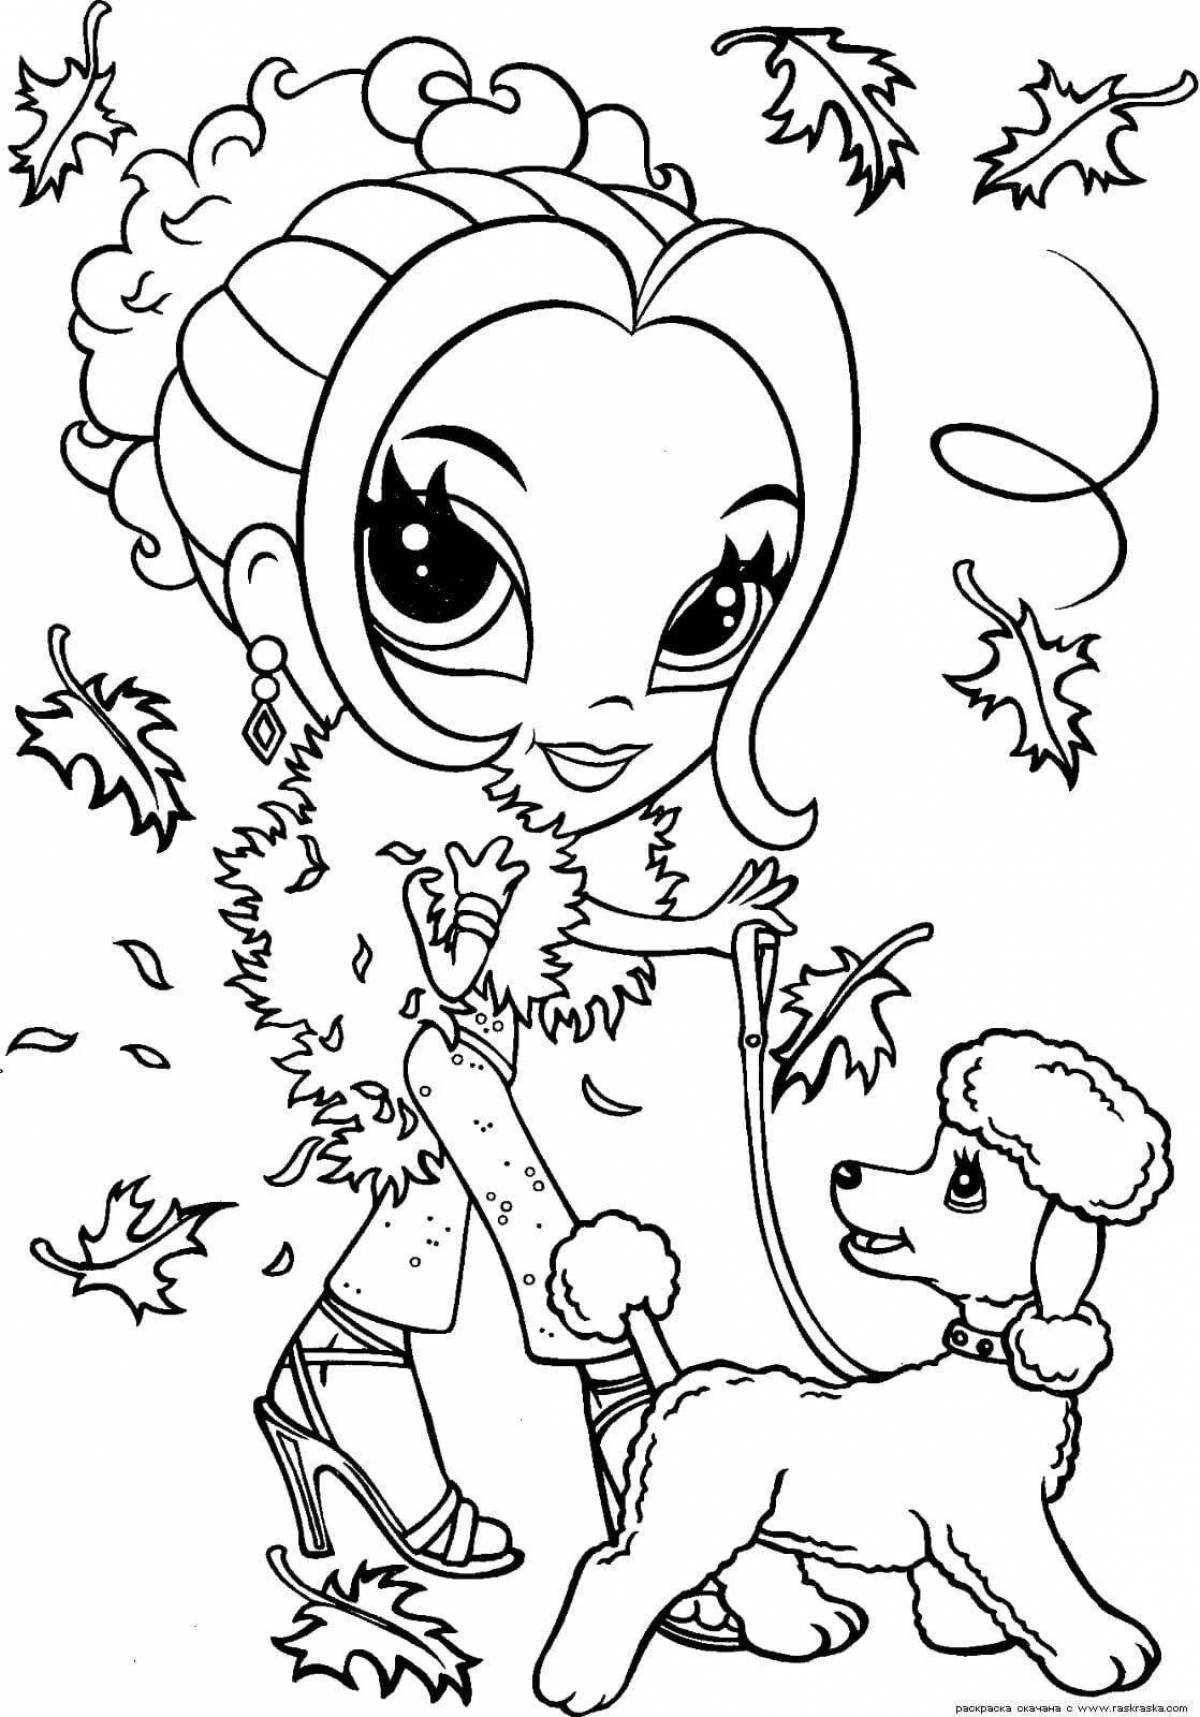 Coloring-inspiration coloring page coloring book